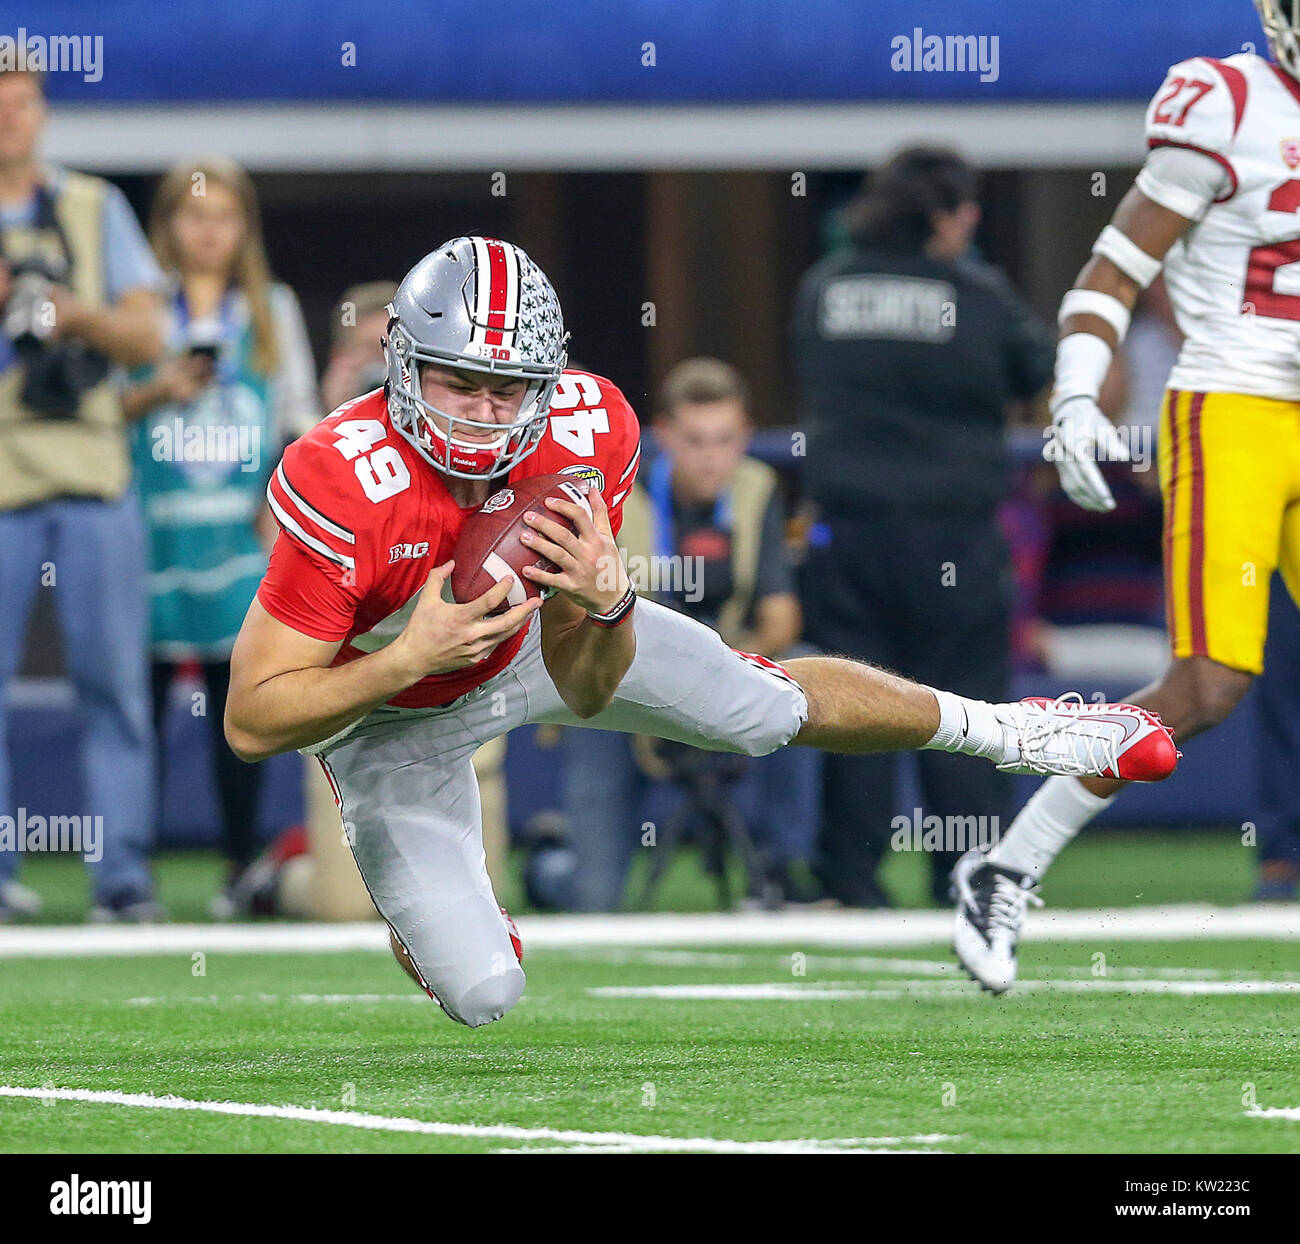 Arlington, TX, USA. 29th Dec, 2017. Ohio State Buckeyes long snapper Liam McCullough (49) saves a punt from going into the end zone in the second quarter during the Goodyear Cotton Bowl Classic between the USC Trojans and the Ohio State Buckeyes at AT&T Stadium in Arlington, TX. John Glaser/CSM/Alamy Live News Stock Photo